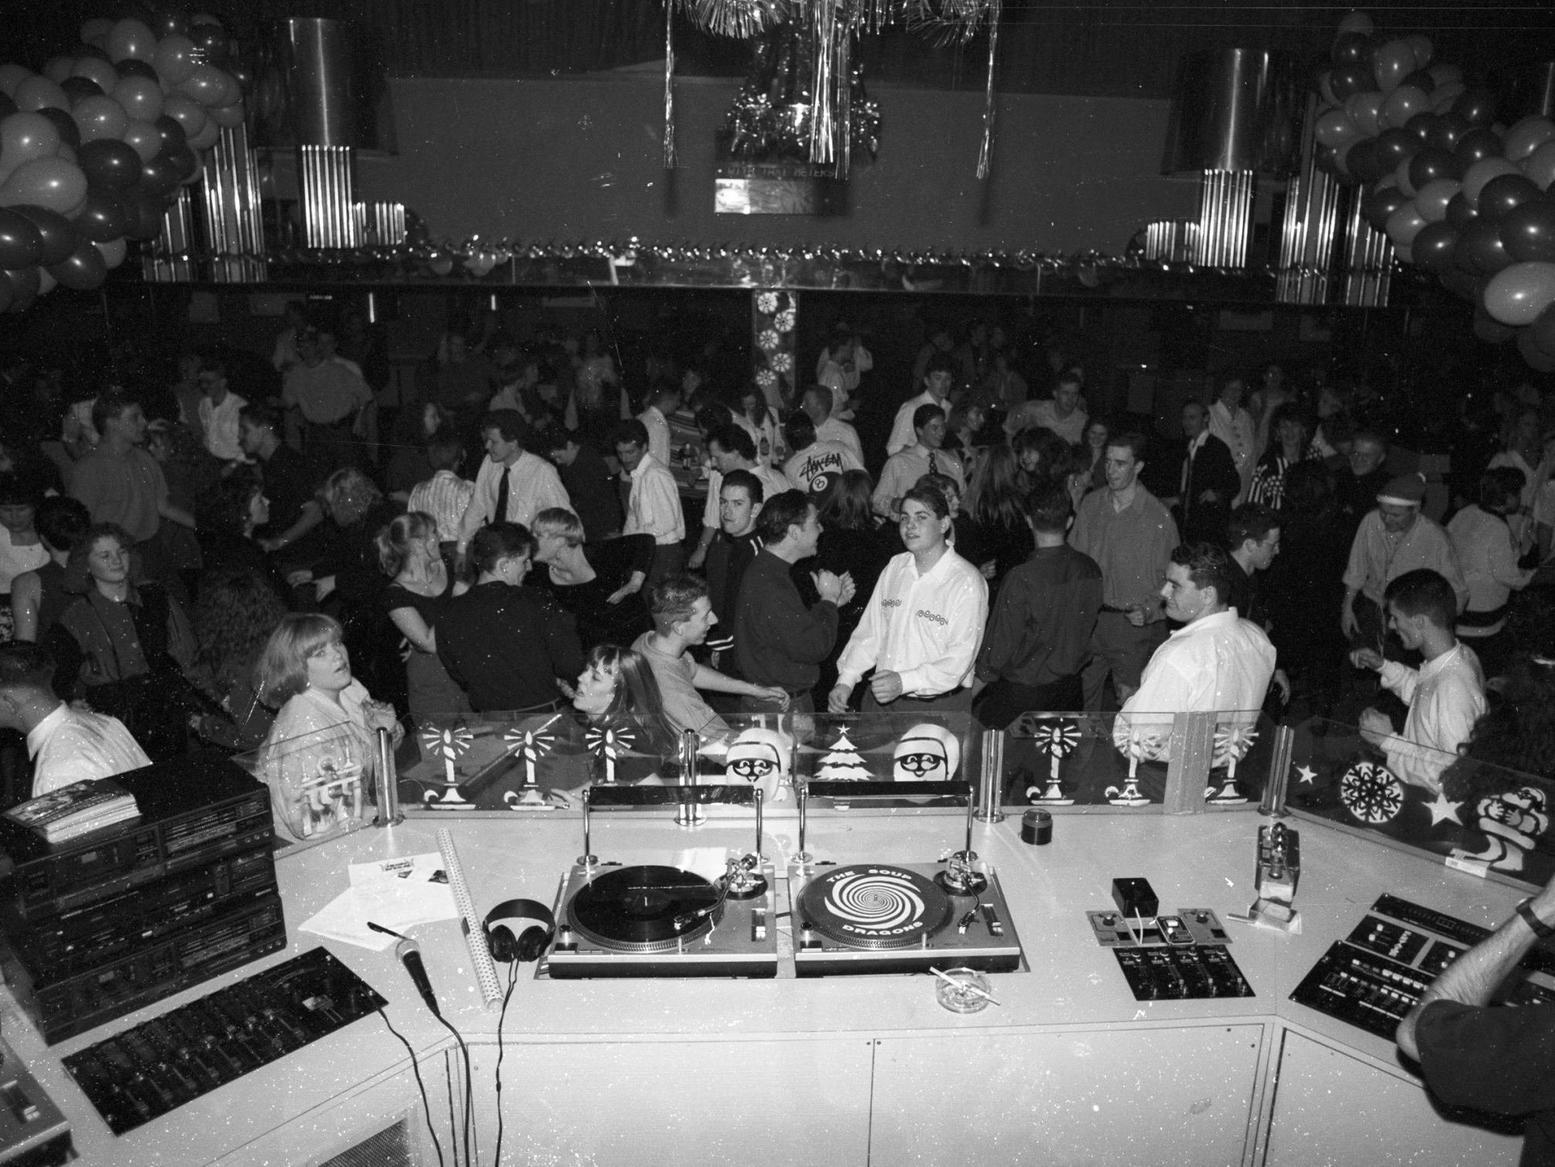 This hi-fi system and decks were state of the art at the time. But in which Leeds nightclub was this photo taken?